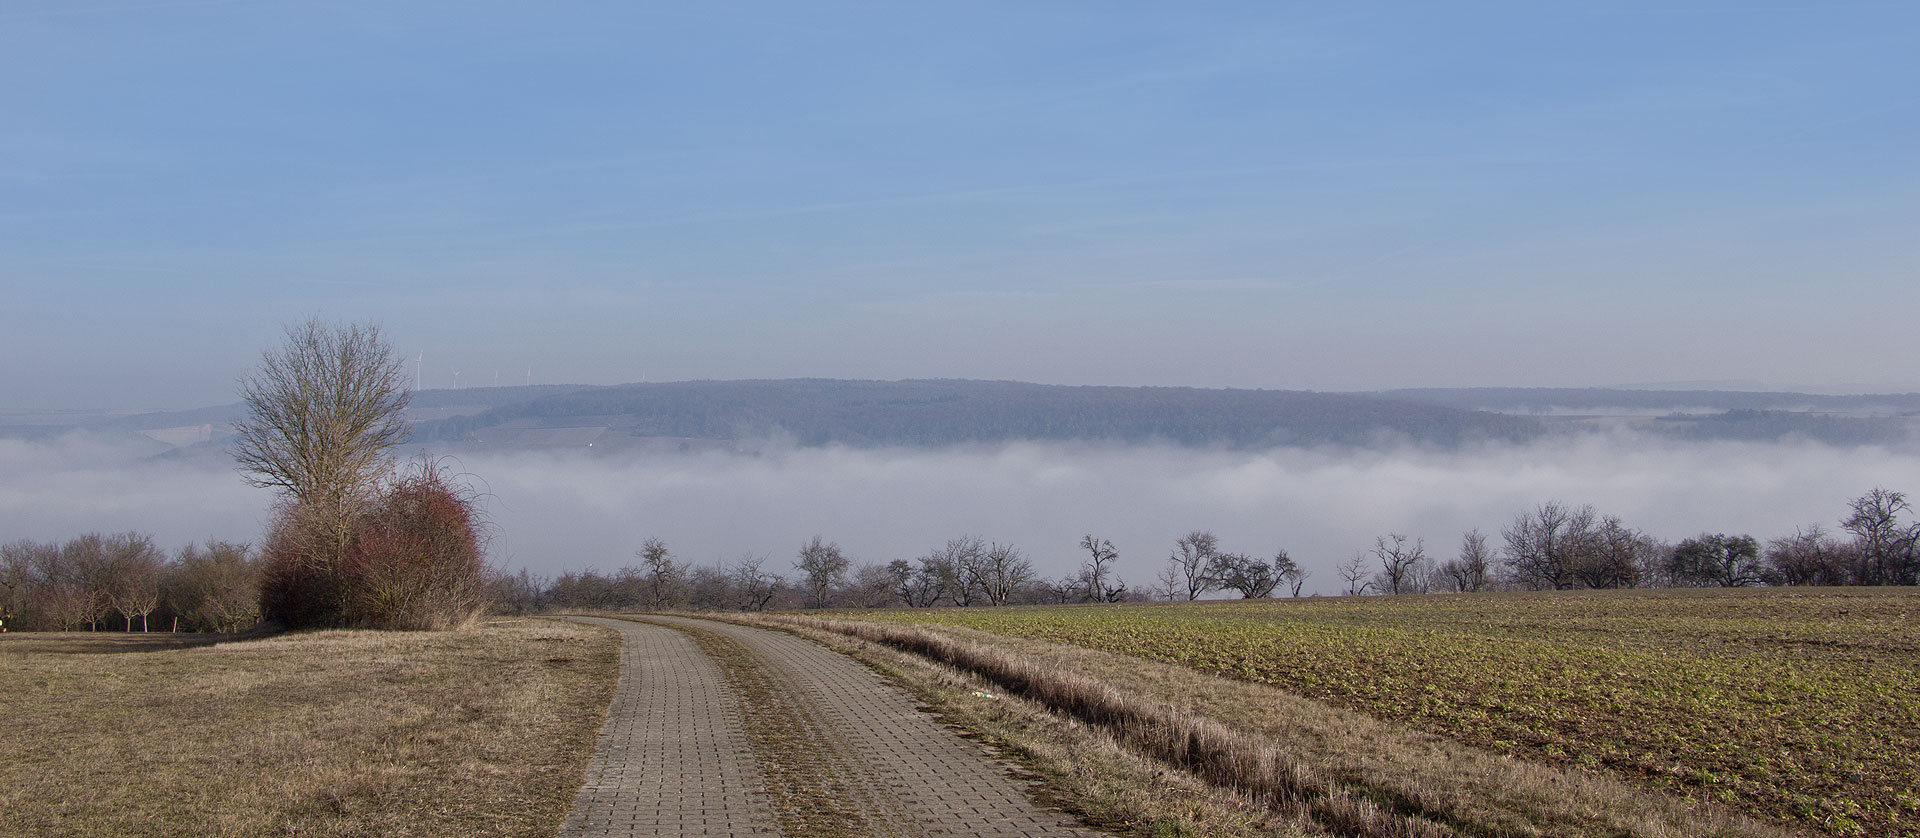 Standspaziergang am Wolkenmeer